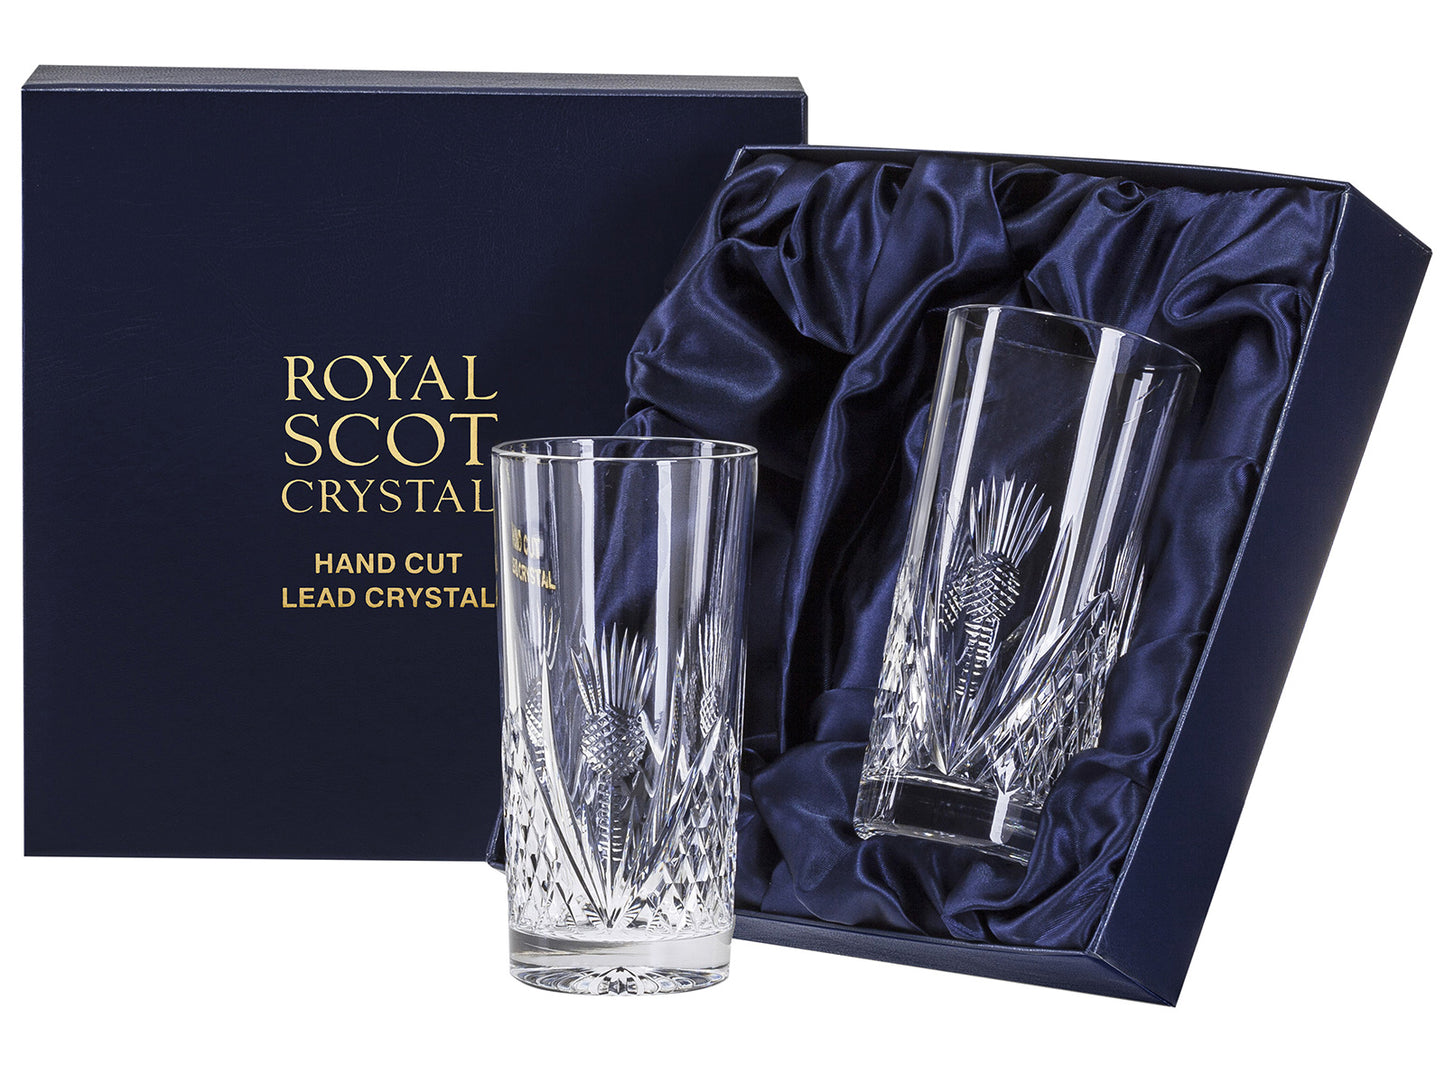 A pair of crystal highball glasses with a Scottish thistle cut into the exterior of the glass, surrounded by a diamond pattern around the base. They come in a navy-blue silk-lined presentation box with gold branding on the lid.